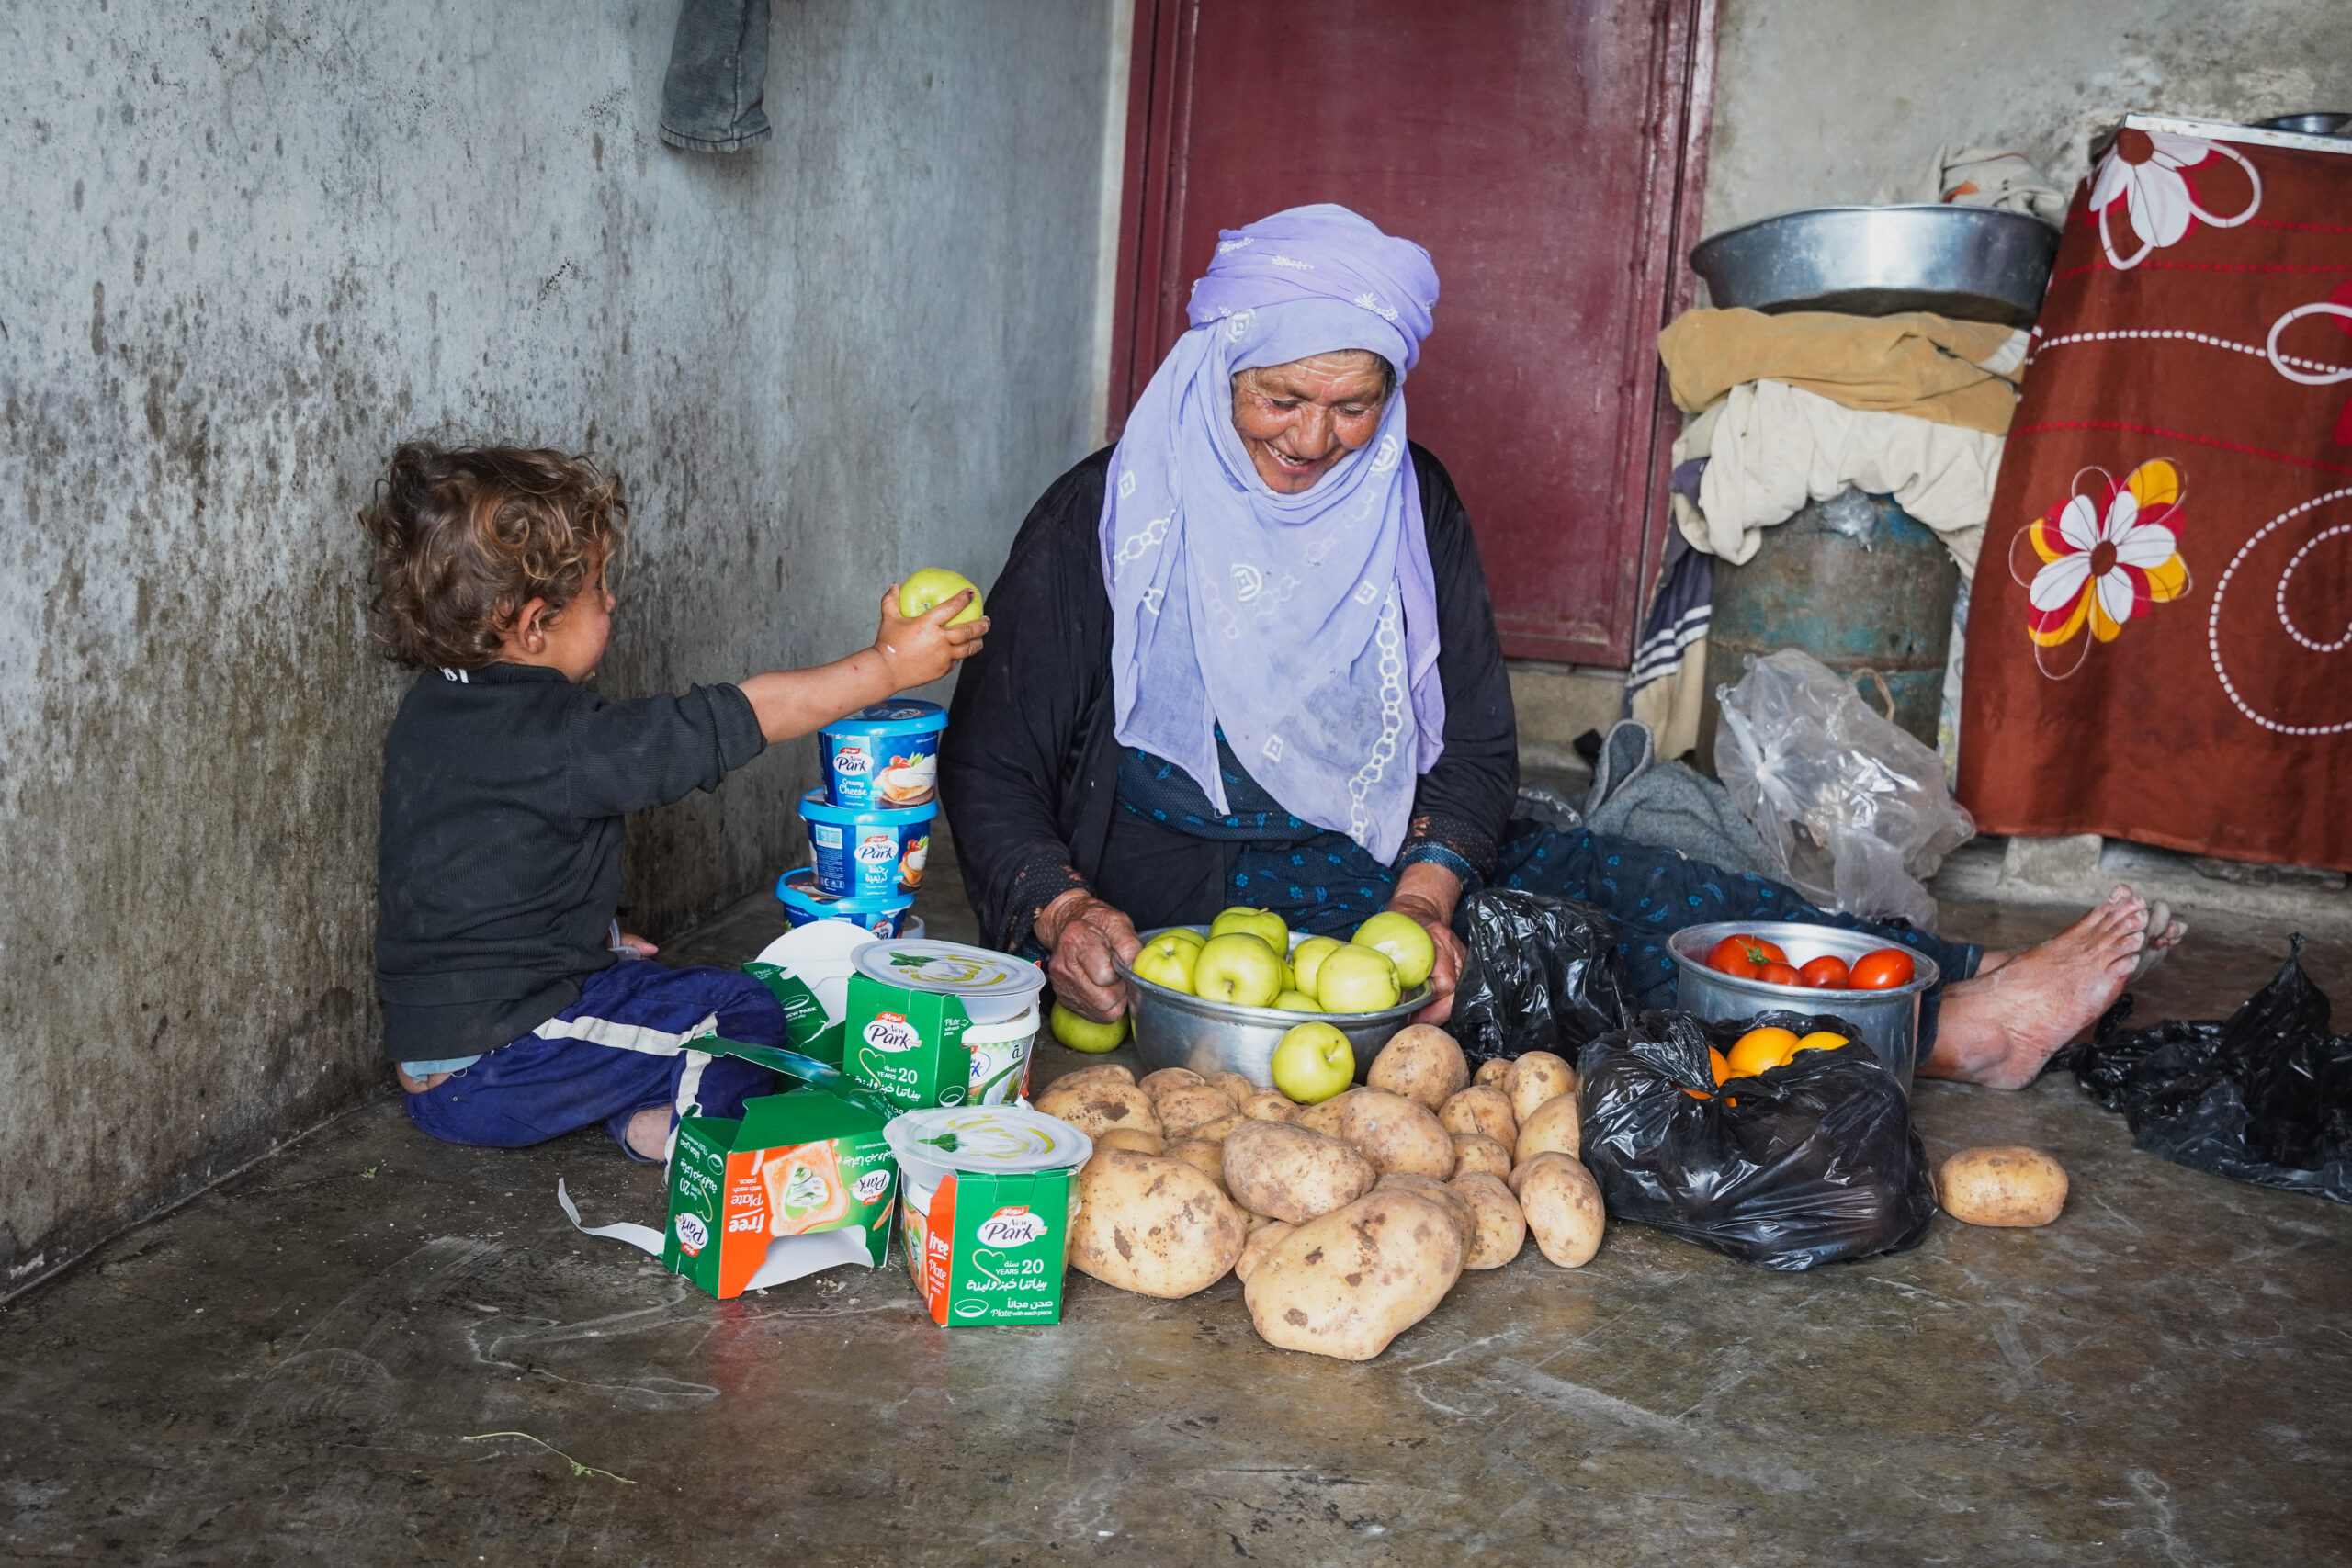 an older woman sorts through fresh produce on the floor of her kitchen alongside her grandson